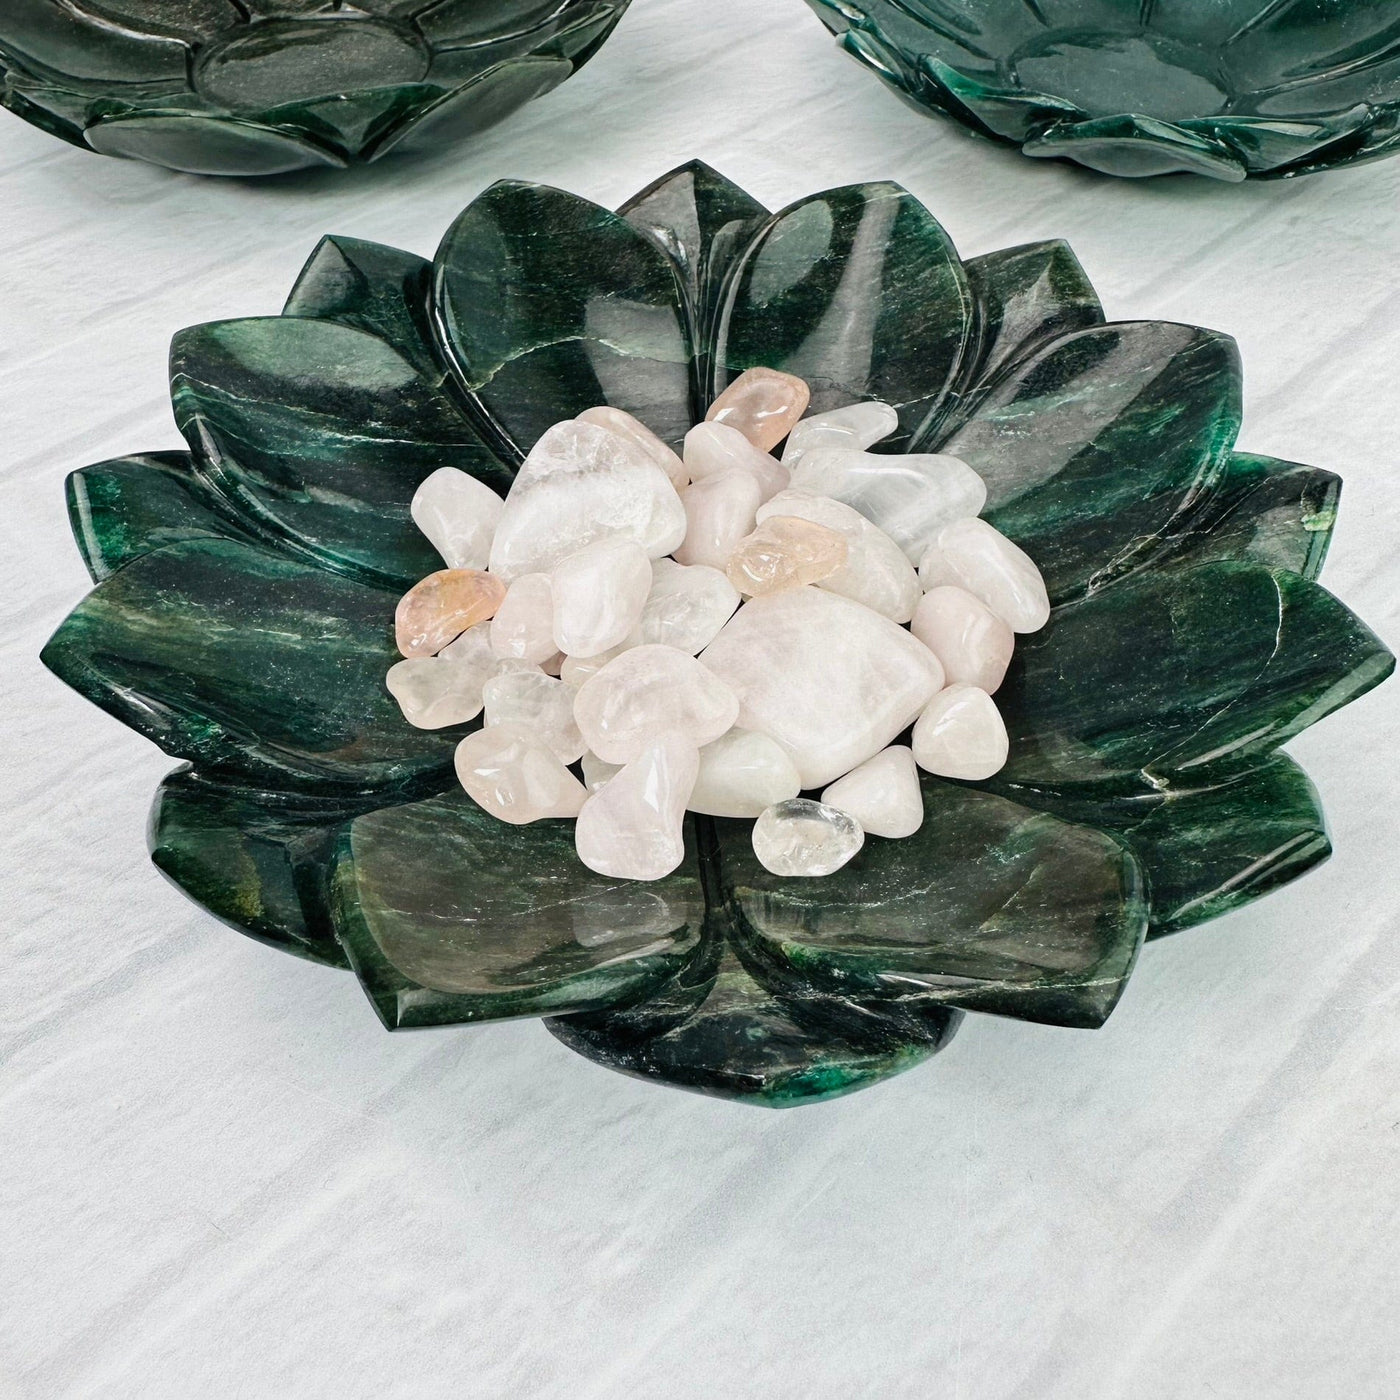 Up close view of Green Quartz Lotus Bowl with small white stones inside.